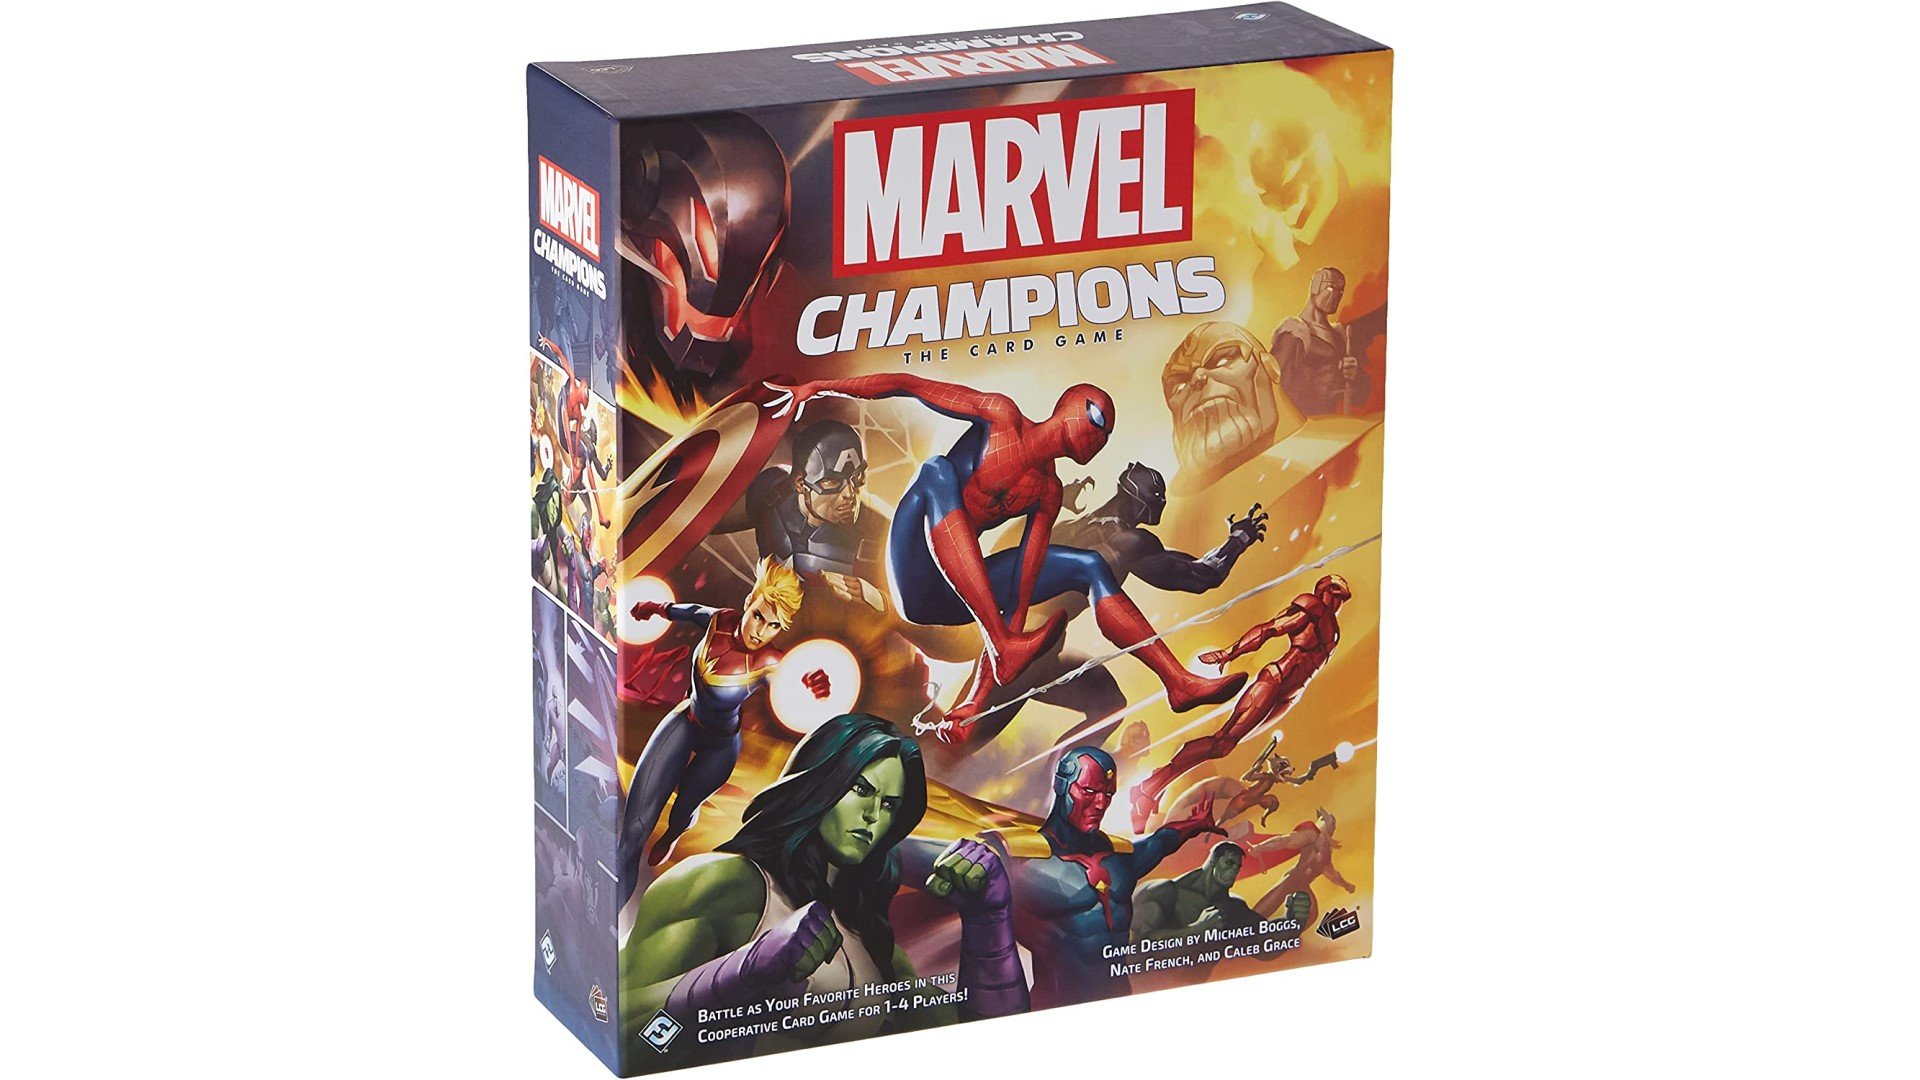 marvel board games - the board game marvel champions